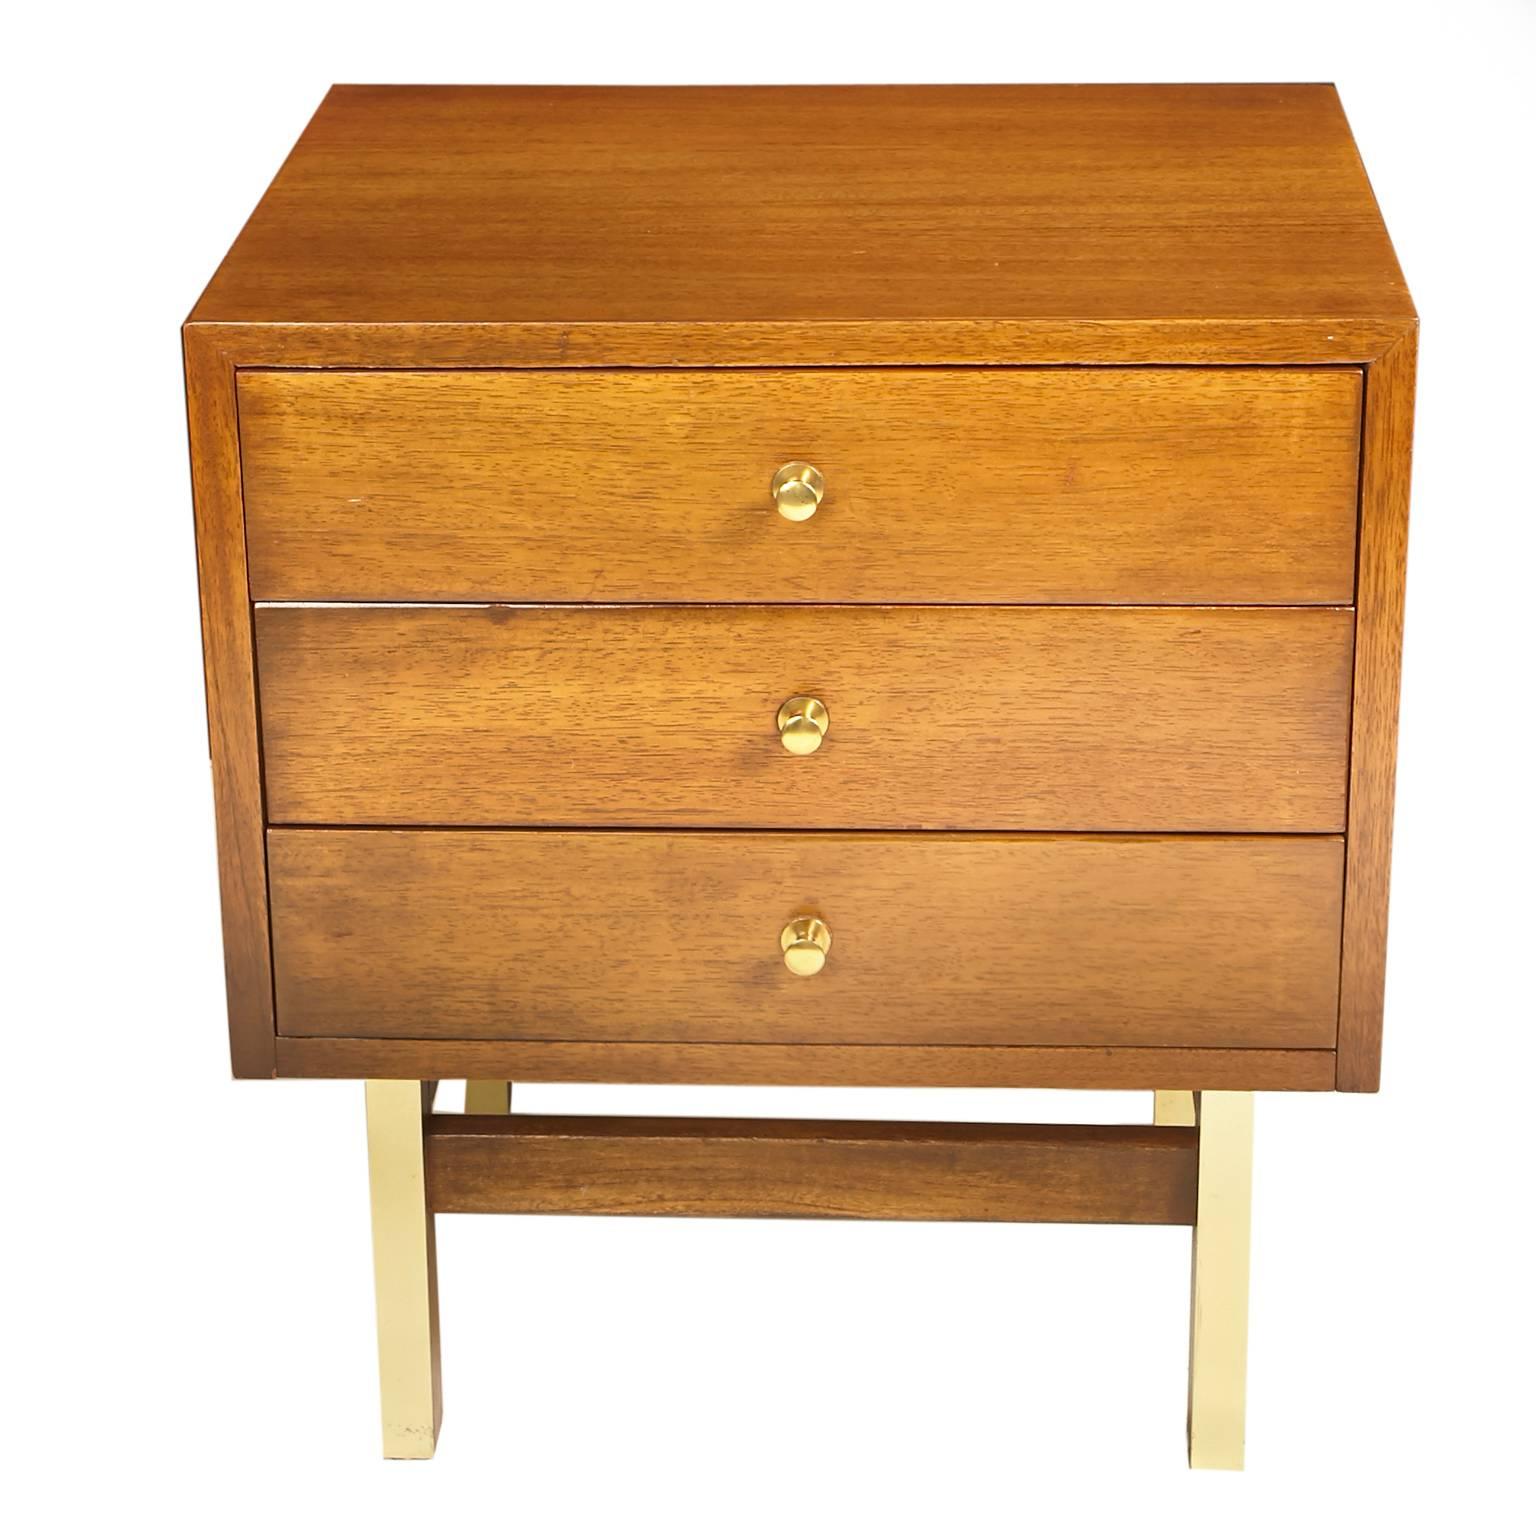 Beautiful American of Martinsville nightstand or side table. Three drawers with original brass pulls, brass clad legs. Stamped American of Martinsville inside one drawer. Very good vintage condition with minor scratch on side.